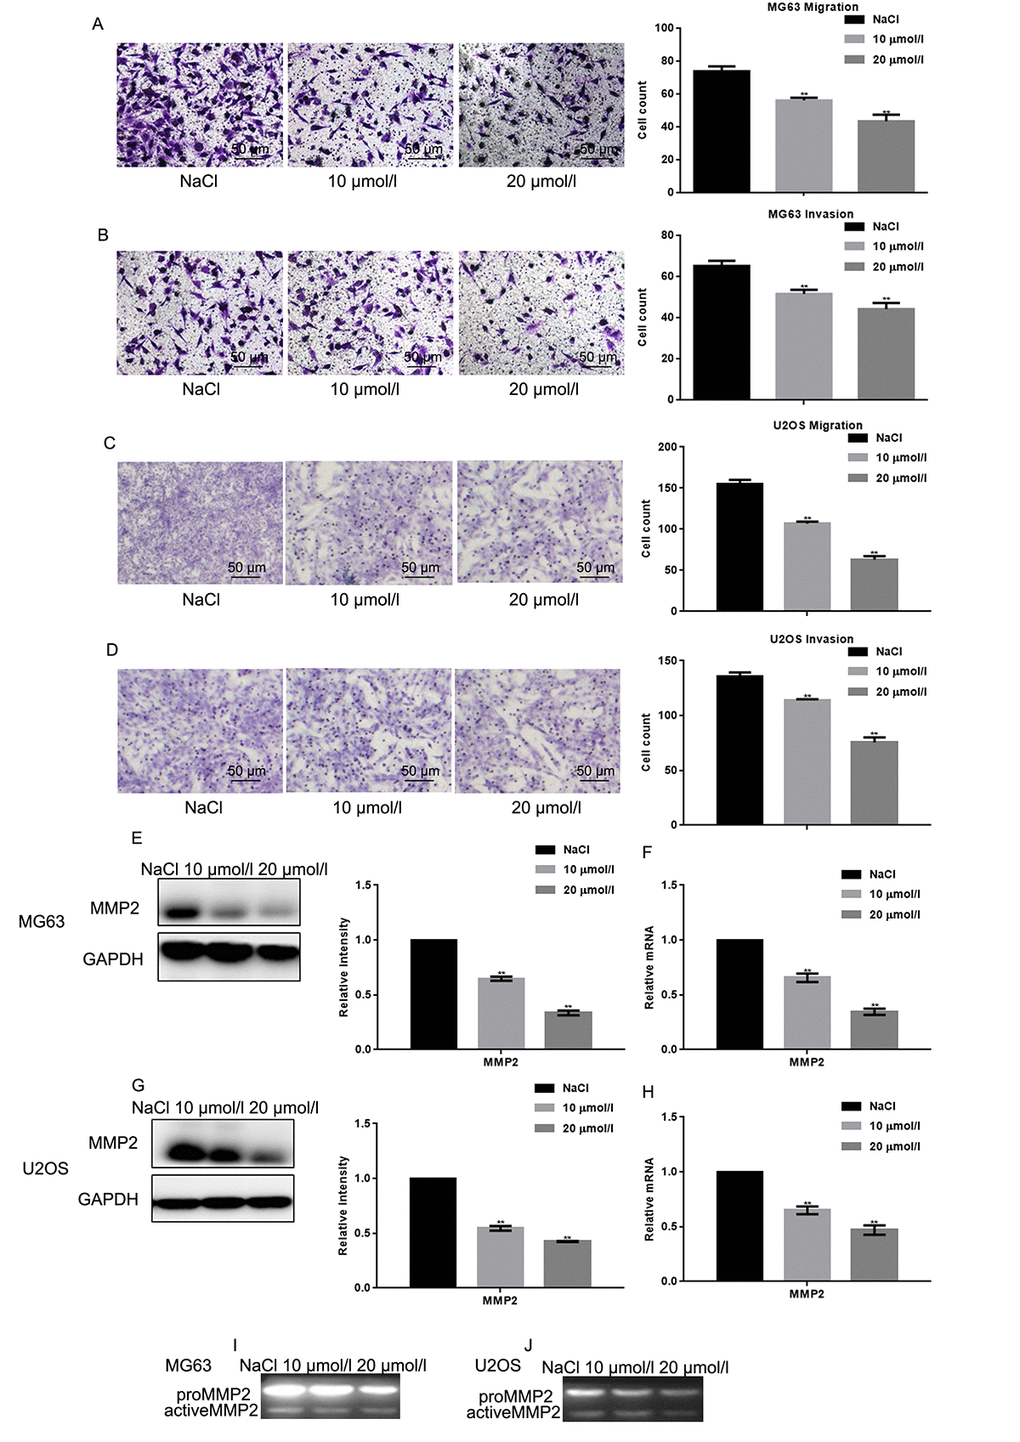 Naringin inhibits migration and invasion of osteosarcoma cells. (A-D) Migration and invasion were studied, respectively, using Transwell assays with or without Matrigel, in naringin-treated MG63 and U2OS cells. Cell count results represent the mean ± SD of three experiments. **P E-H) MMP2 expression by Werstern blot and real-time PCR in MG63 and U2OS cells treated with NaCl or naringin for 24 h. **P I, J) Zymography gel assay showing the inhibitory effect of naringin on MMP2 activity in MG63 and U2OS cells.